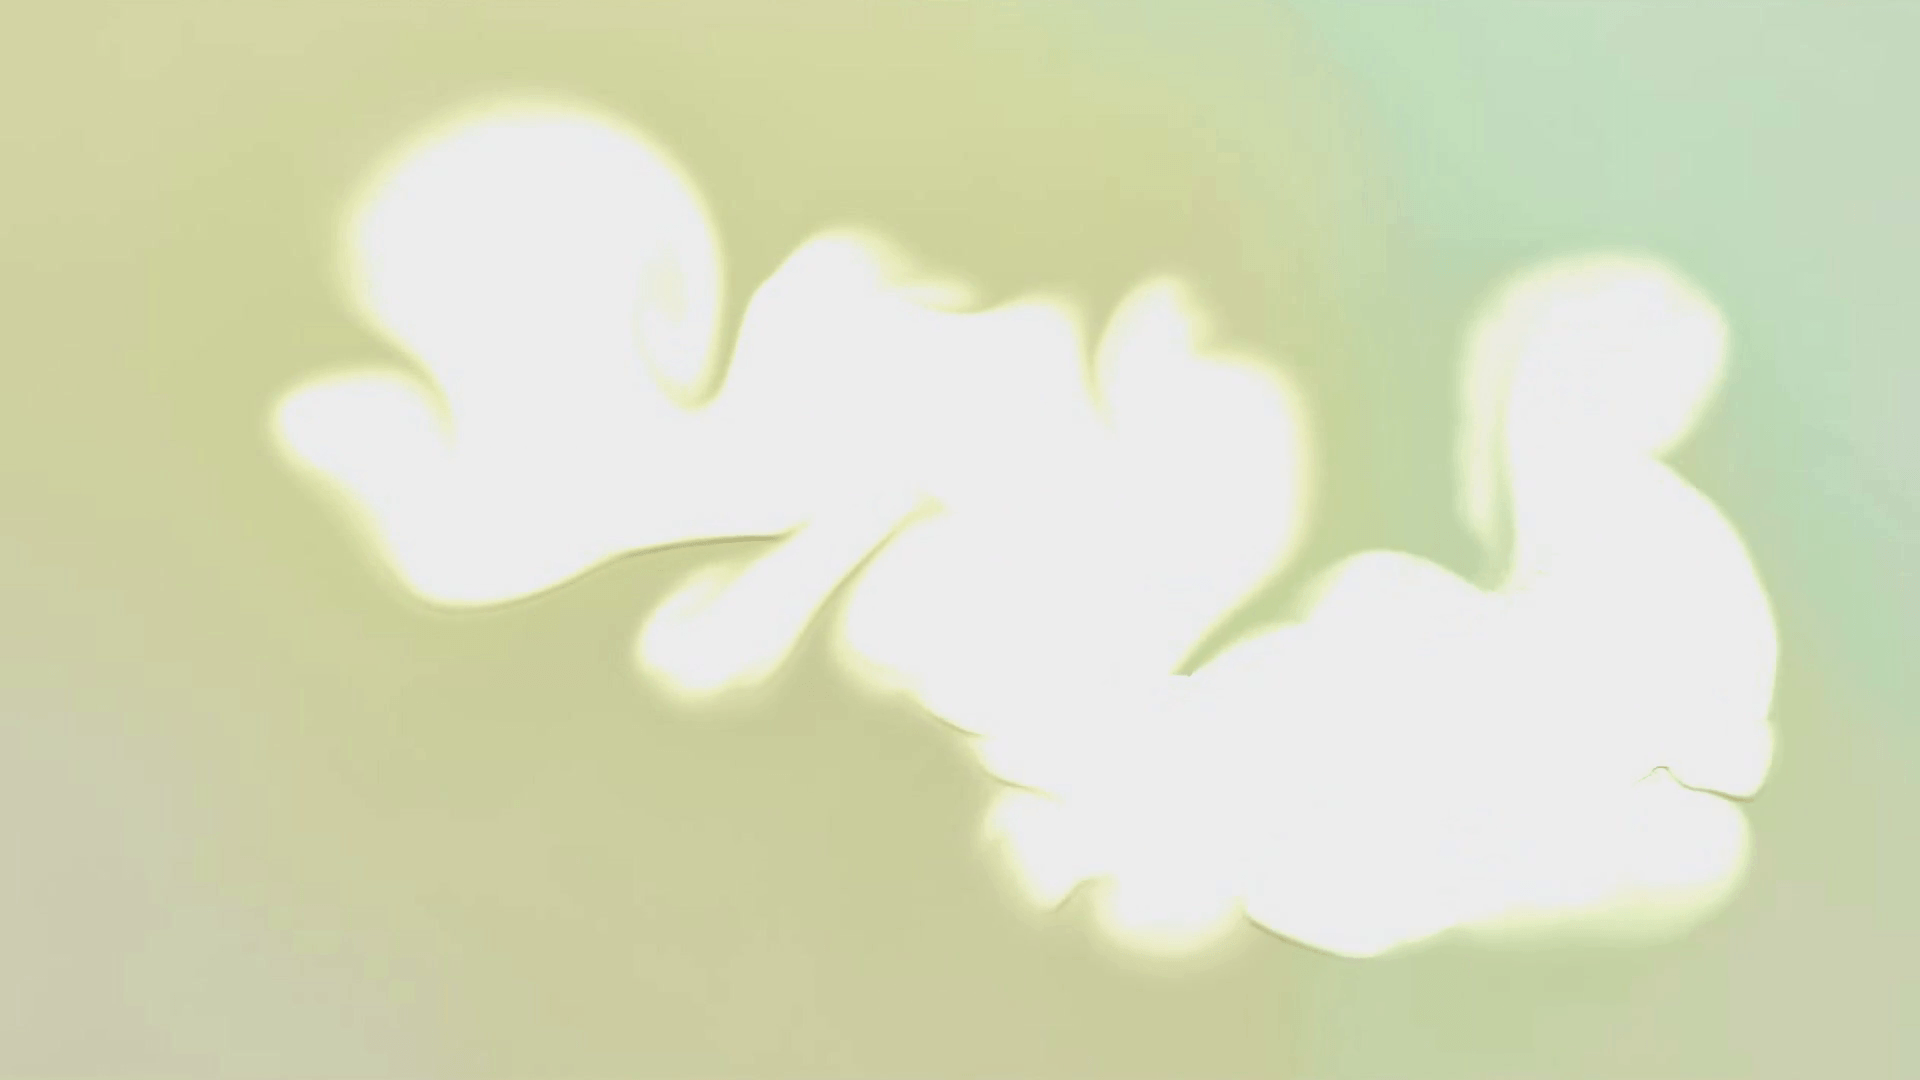 Digitally created flowing green and white abstract painting